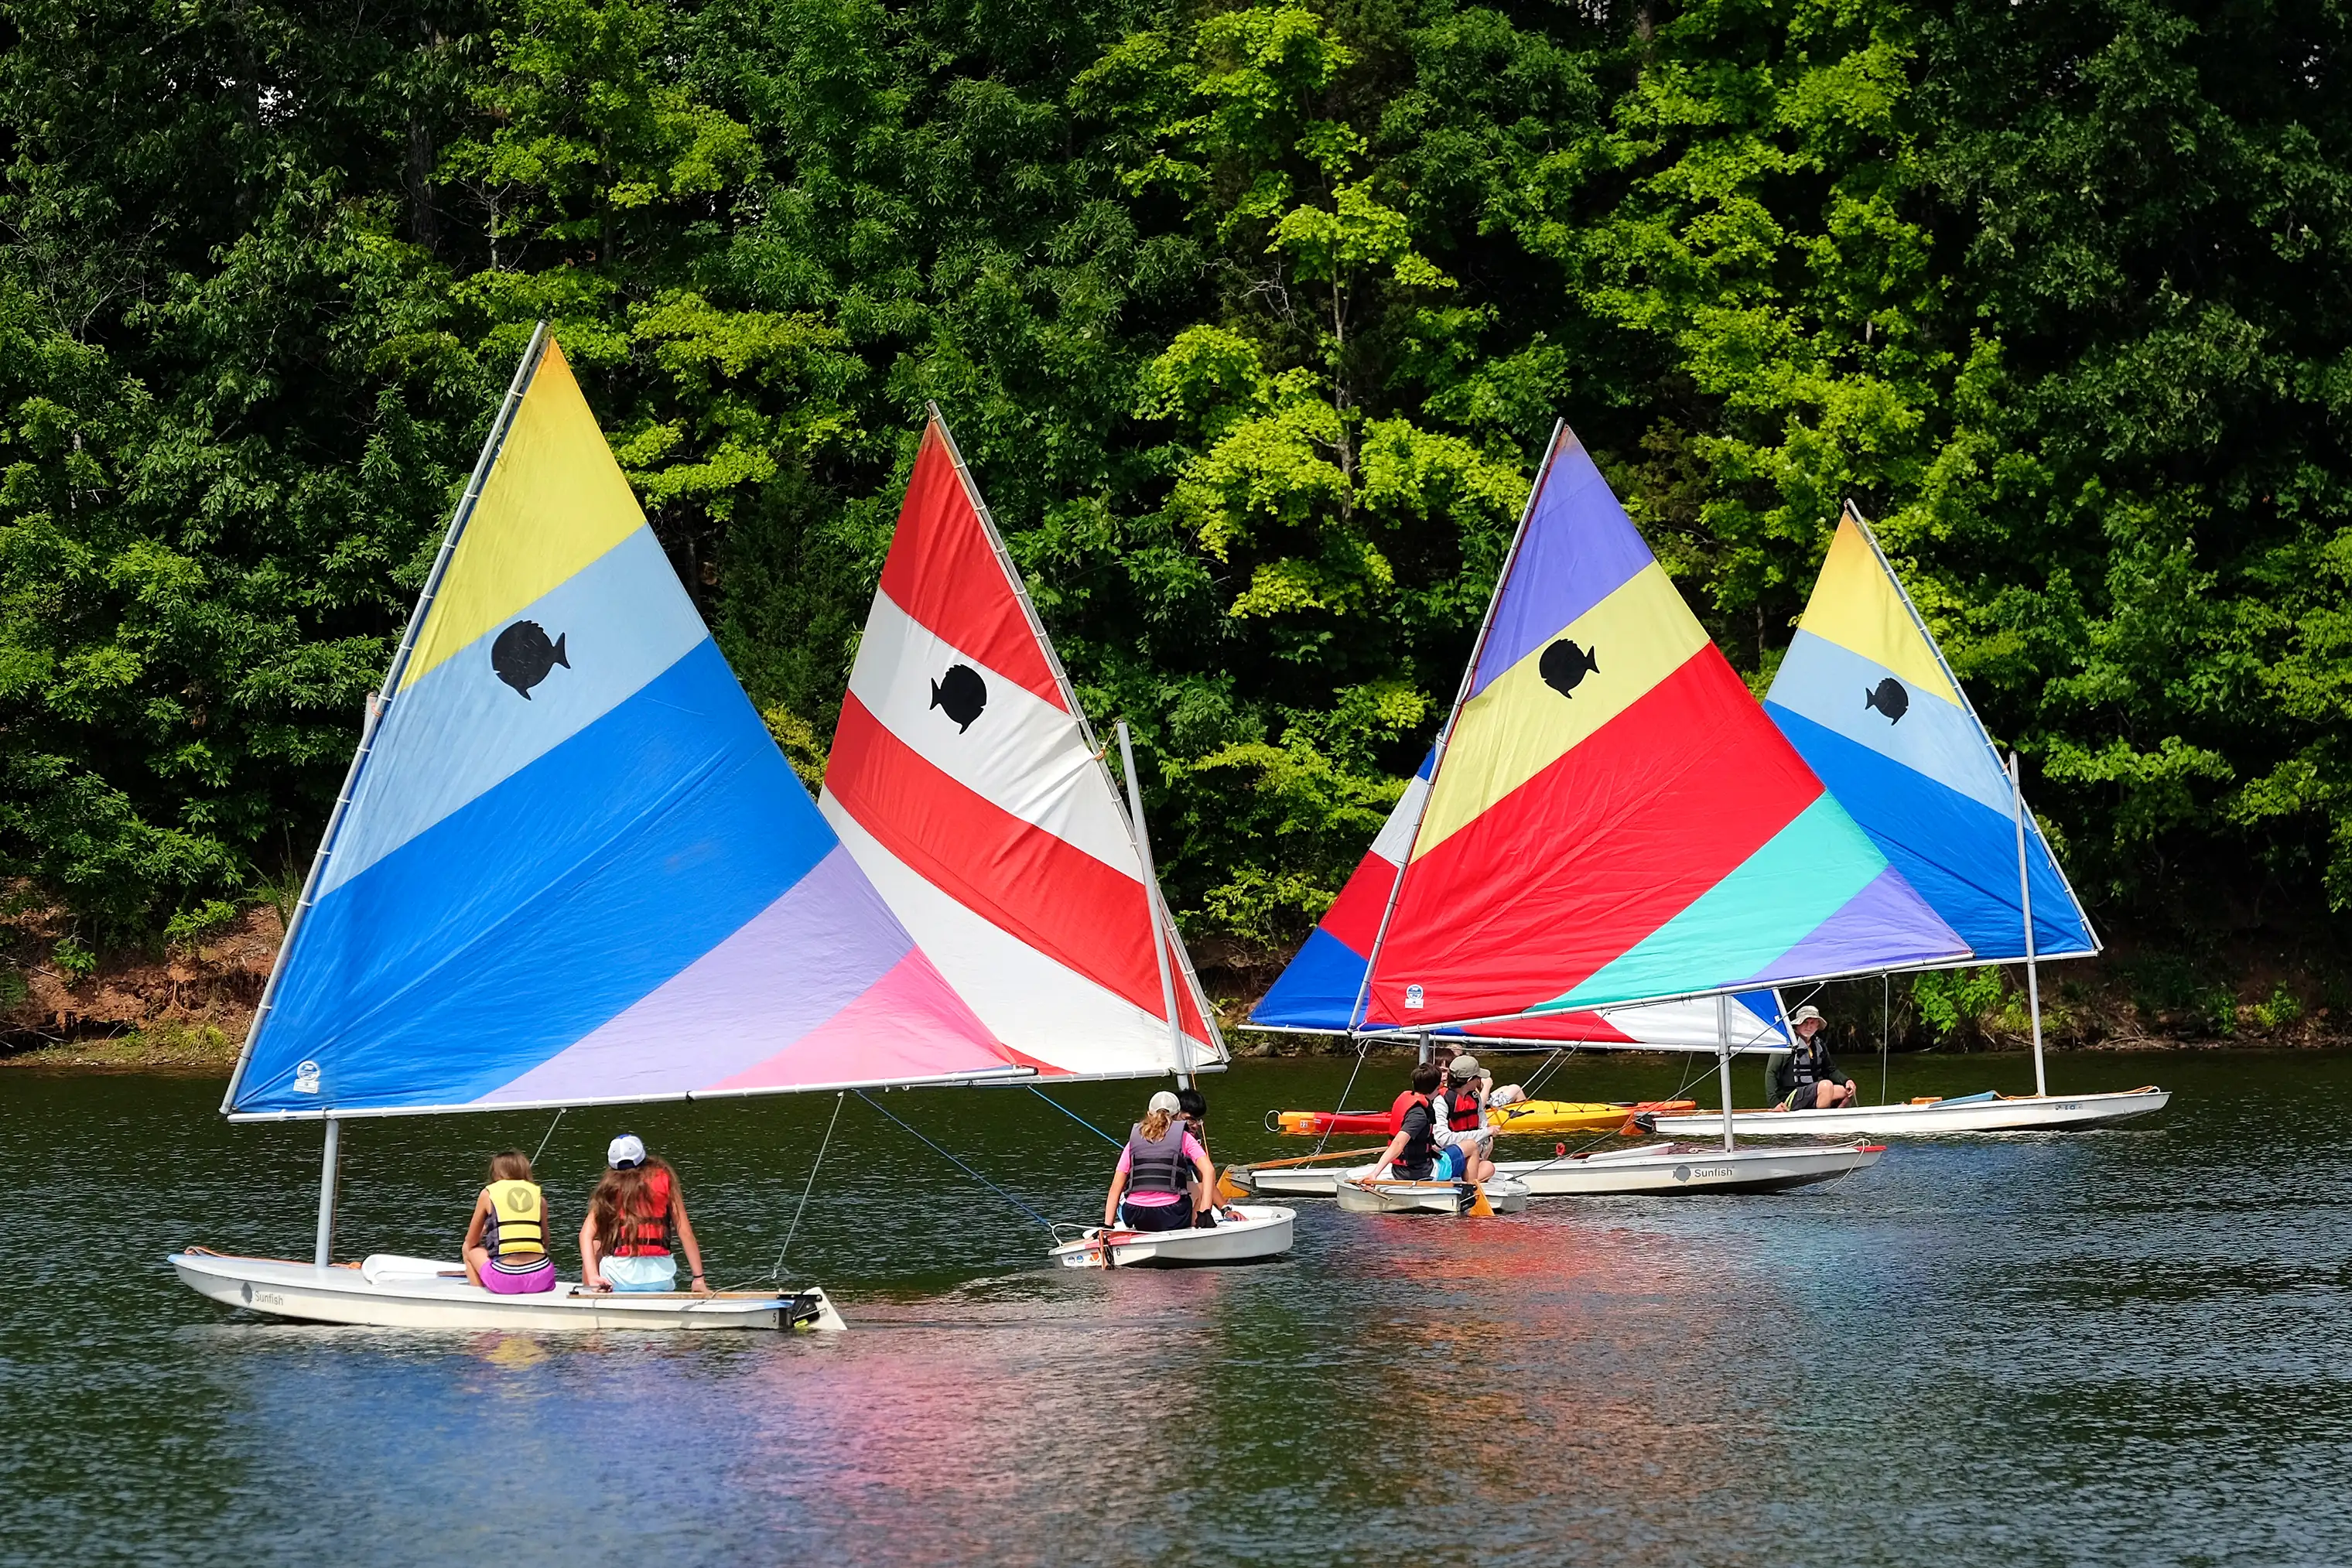 Sailboats are available for rent at Bond Park in Cary, N.C.